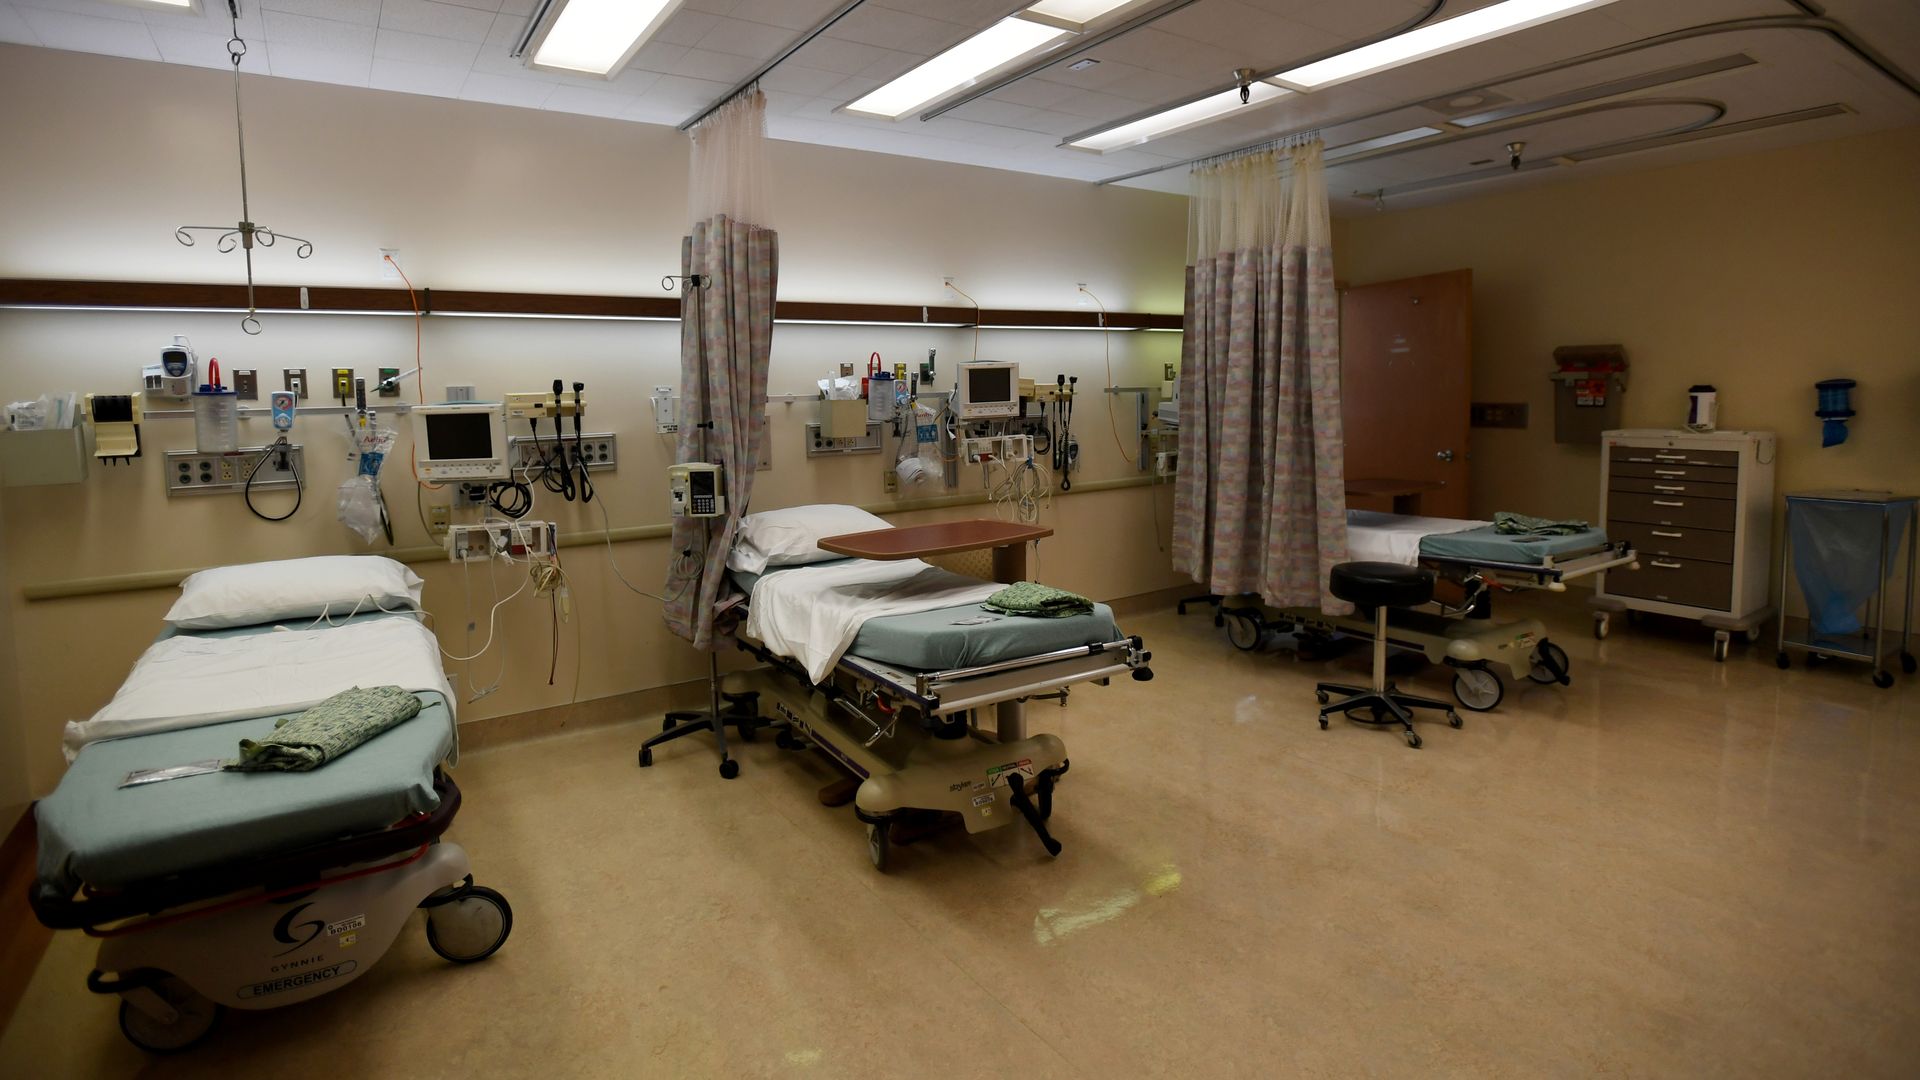 Vacant hospital beds in an emergency room.